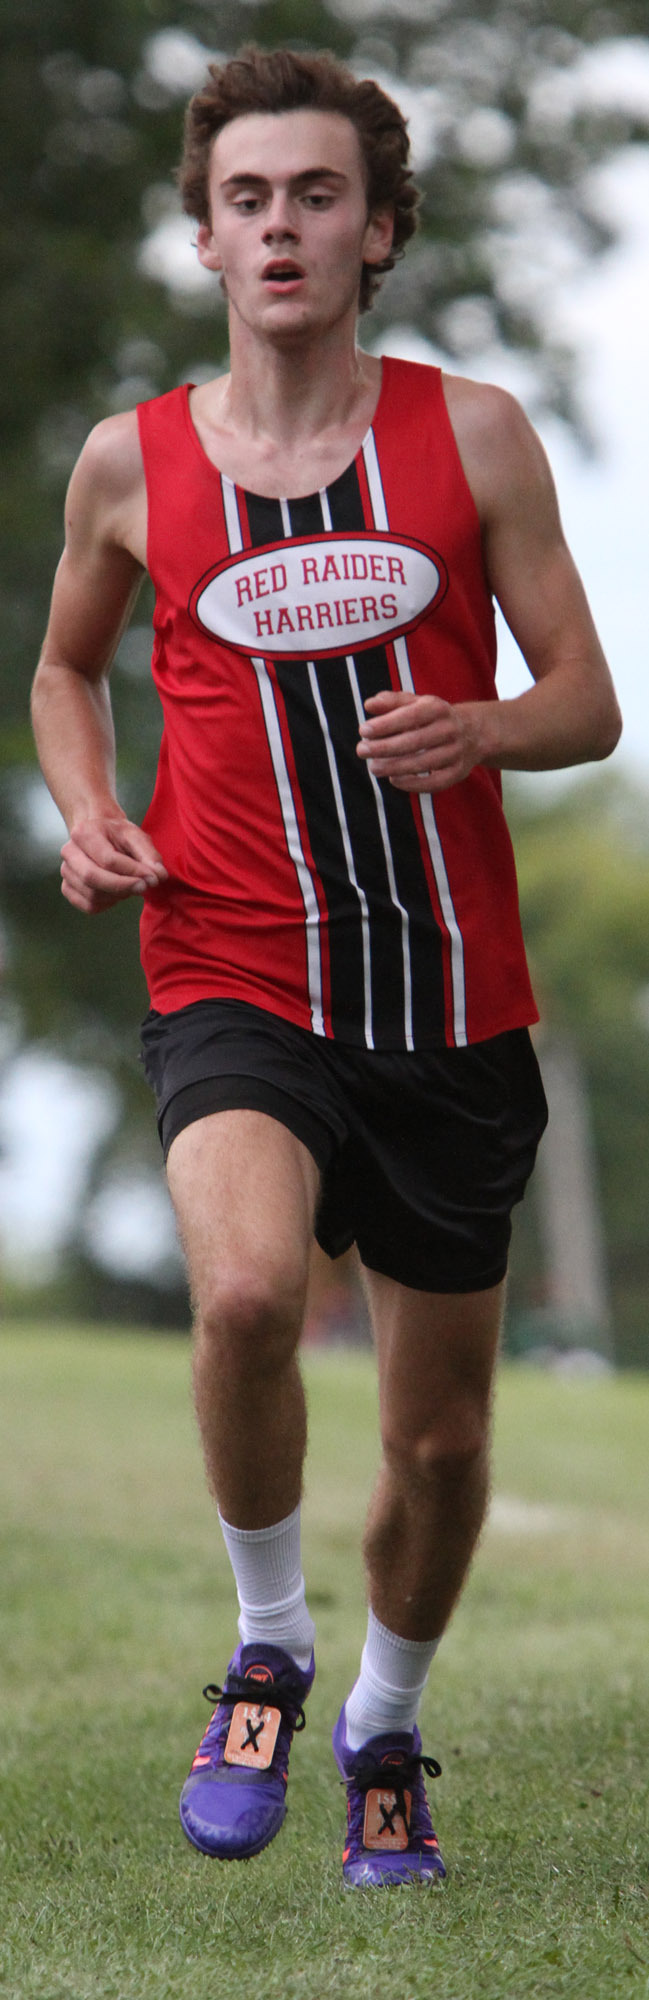 Wauwatosa East’s Sam Potter finished second with a time of 16:41.91 in the Menomonee Falls Coaches Classic cross country race Aug. 28 at Rotary Park.